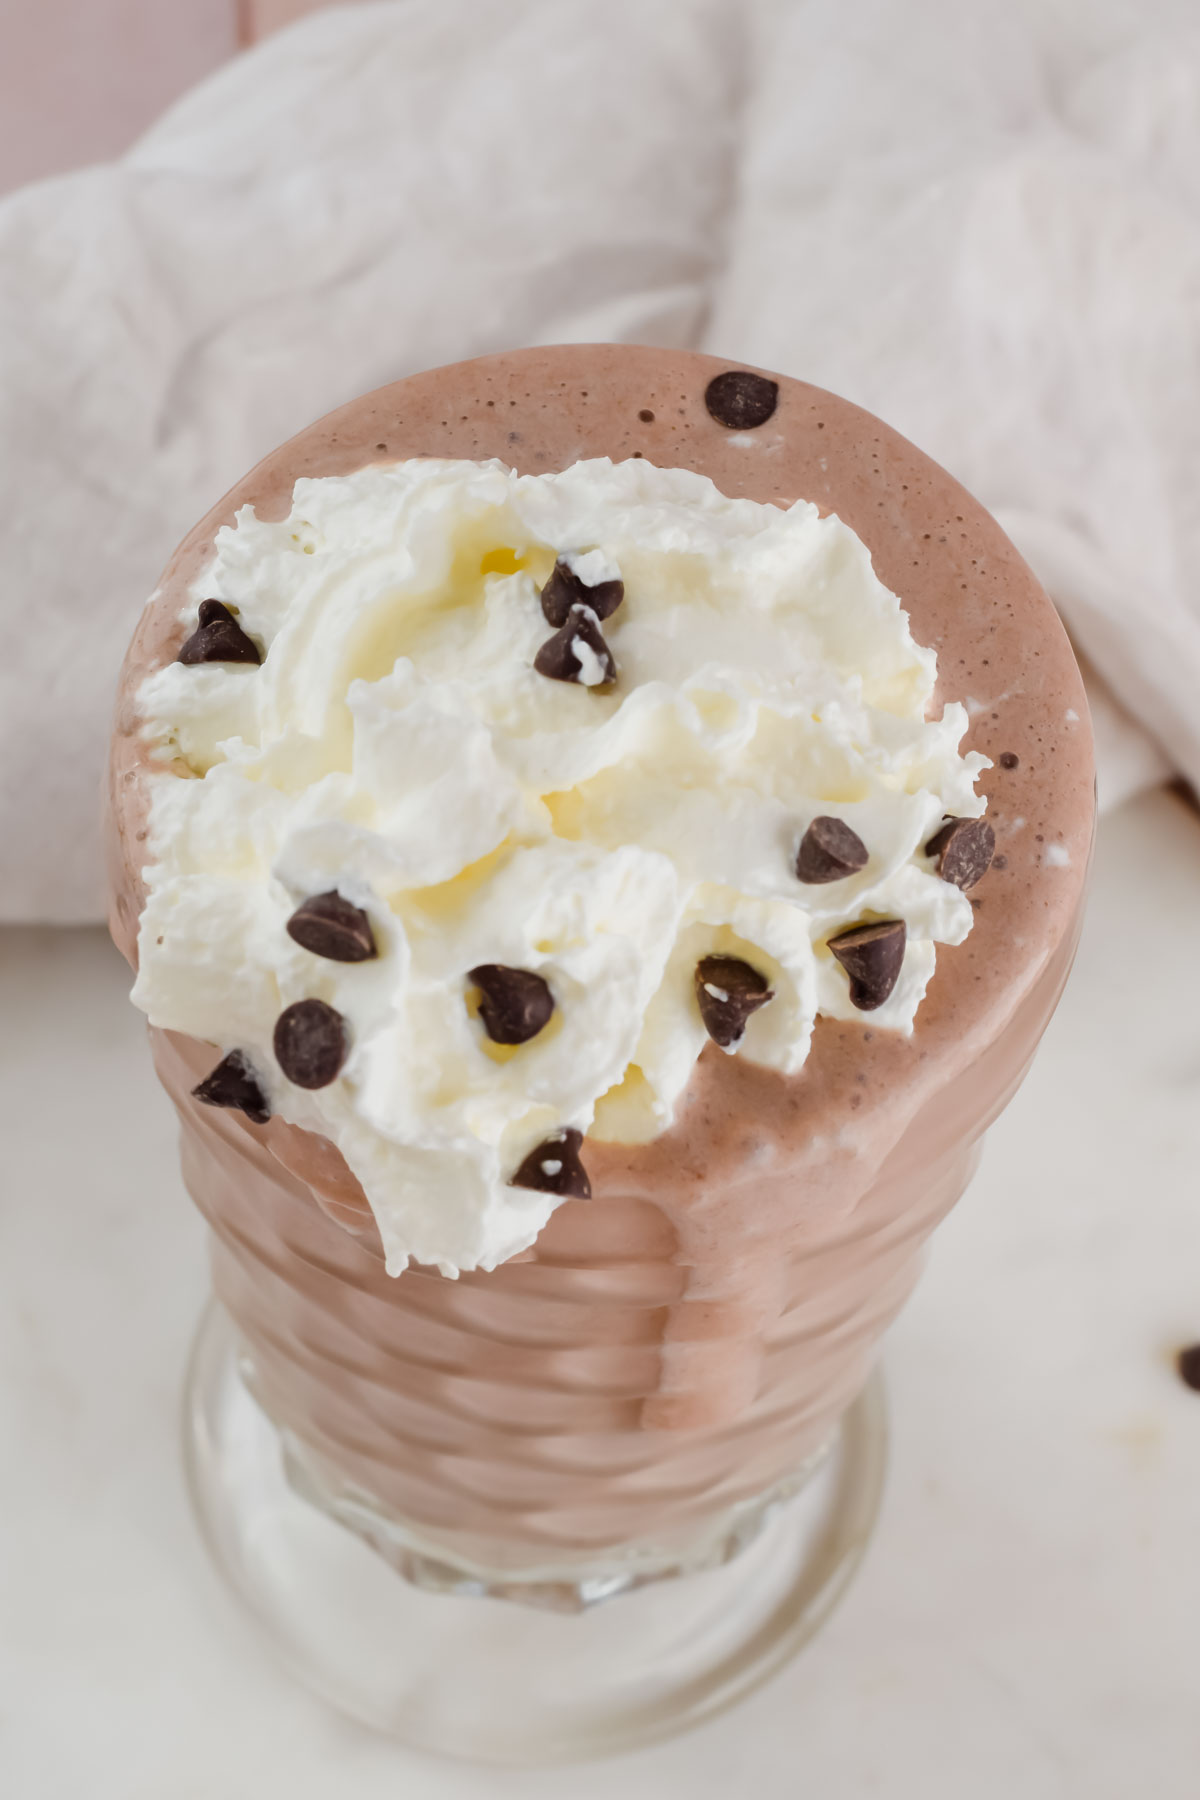 homemade wendy's frosty in milkshake glass, topped with whipped cream and chocolate chips.